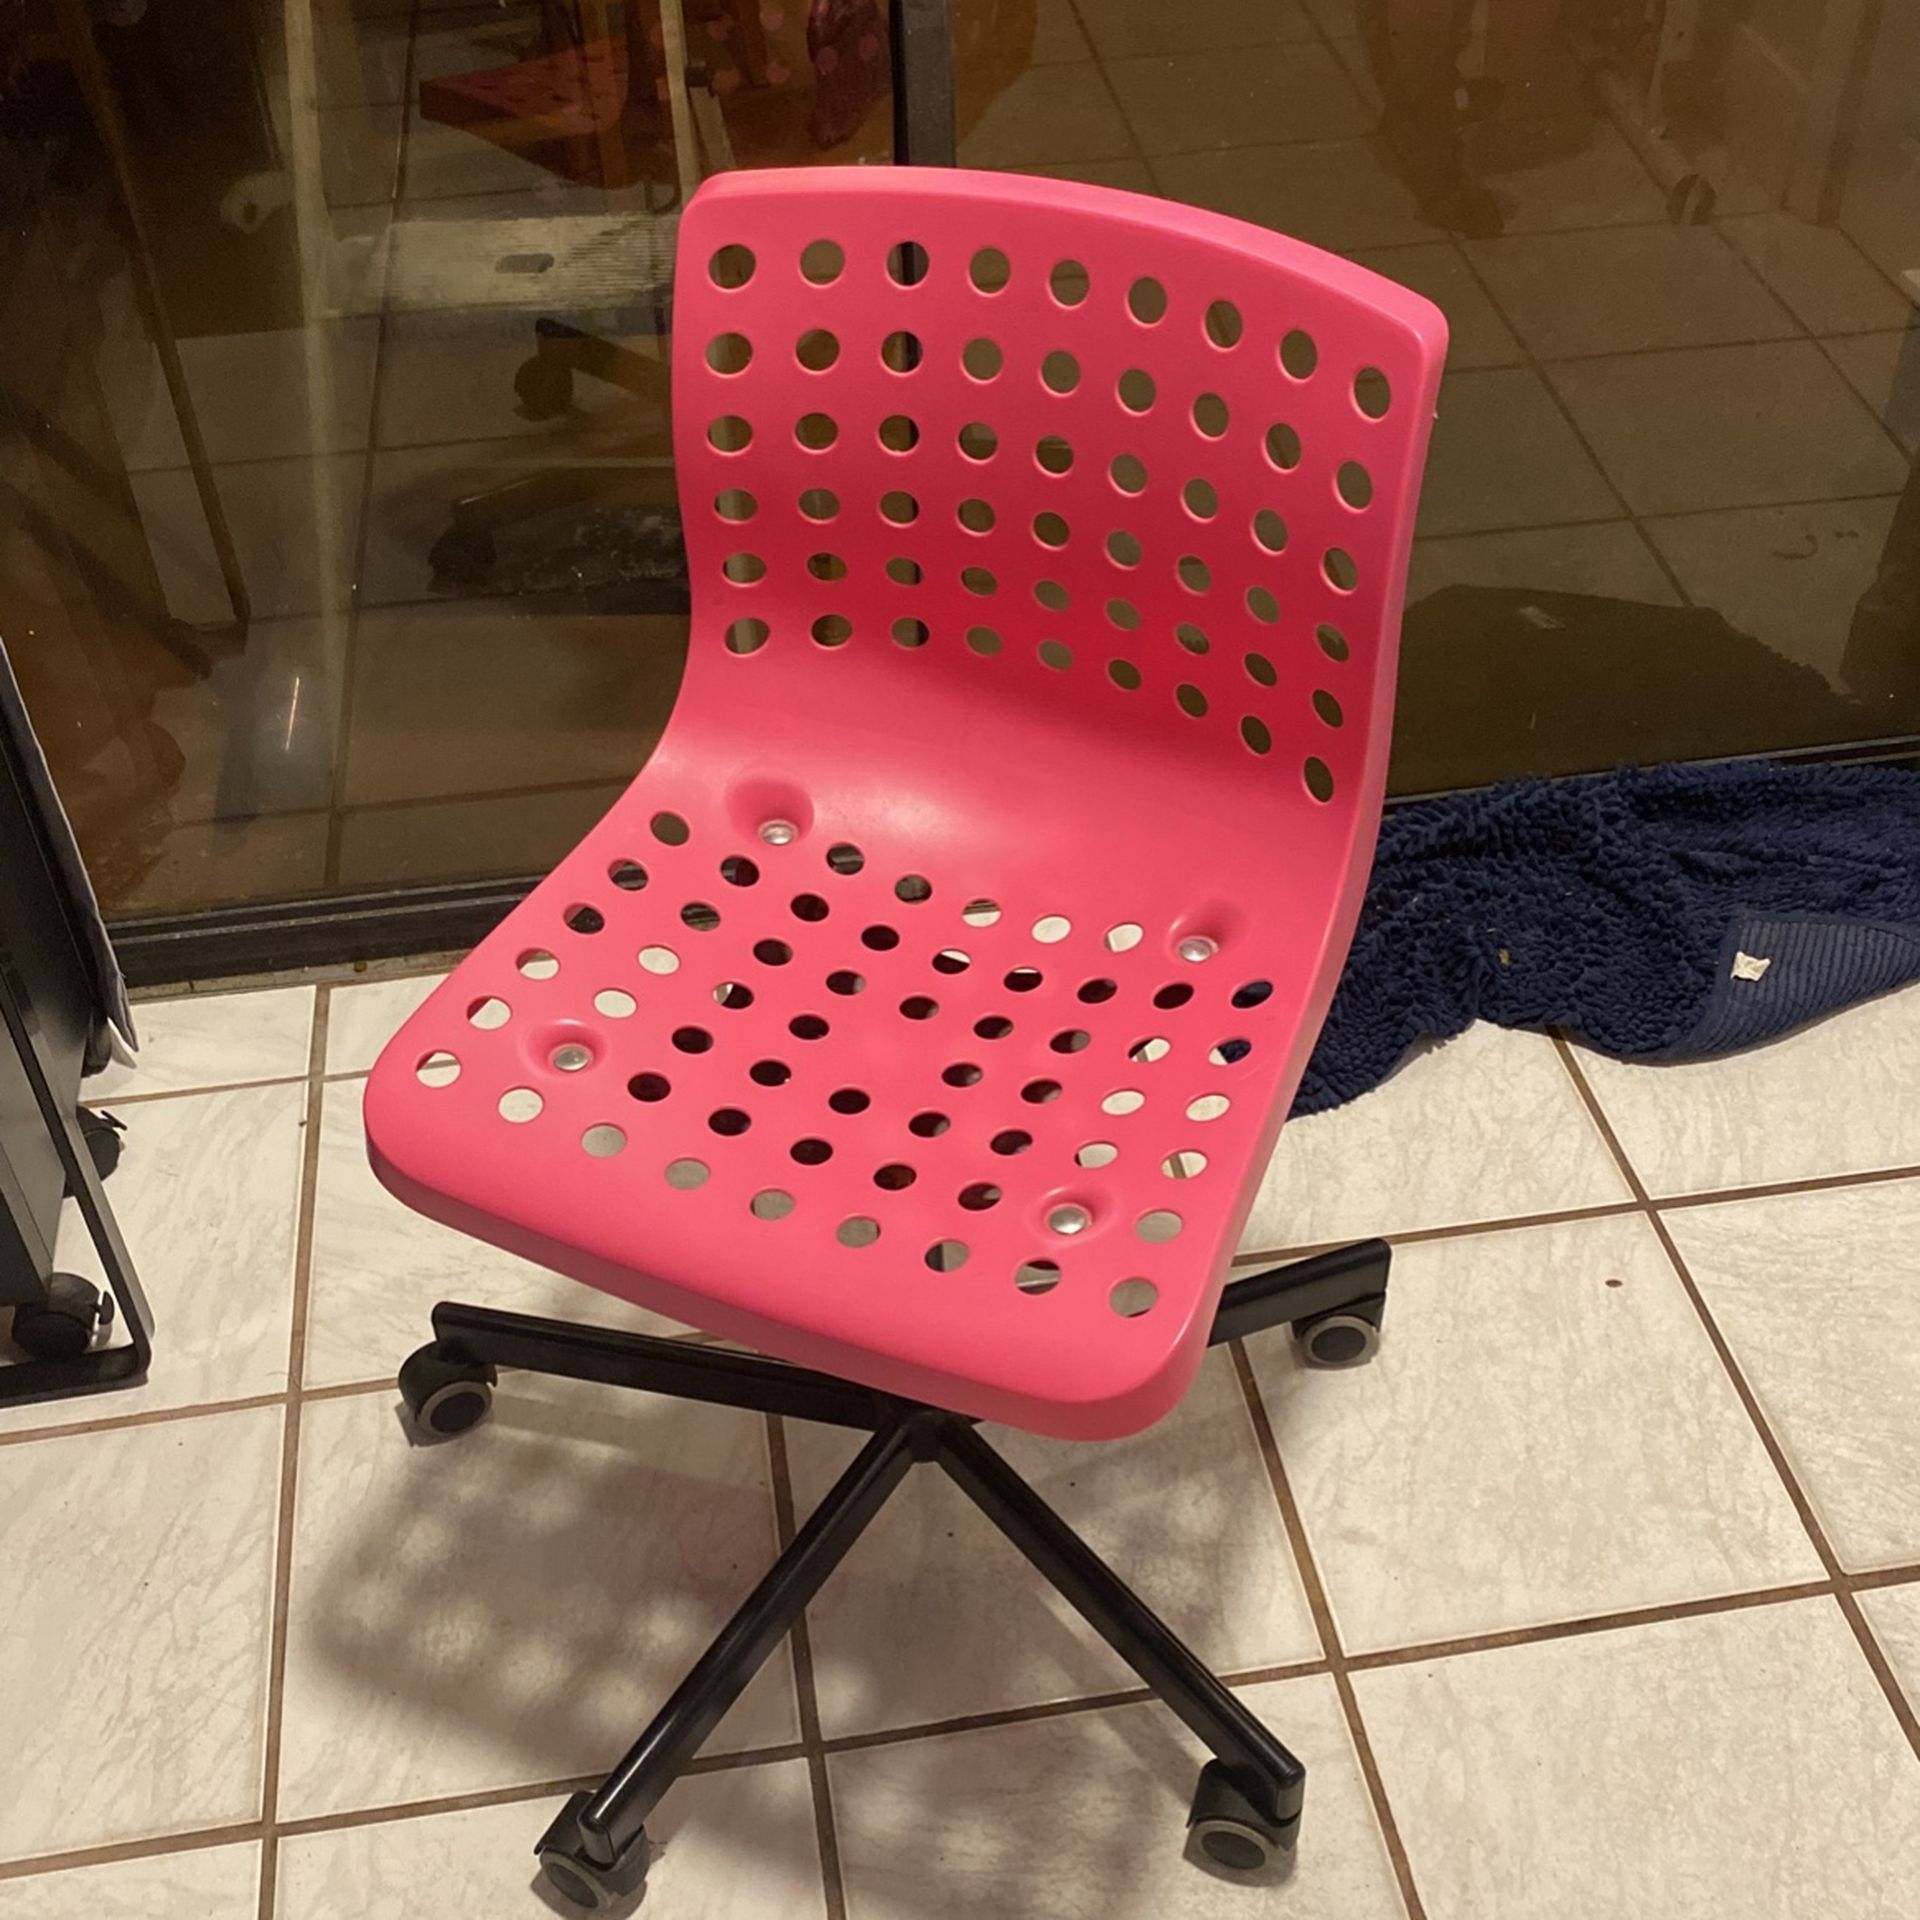 Pink Desk Rolling Chair $20